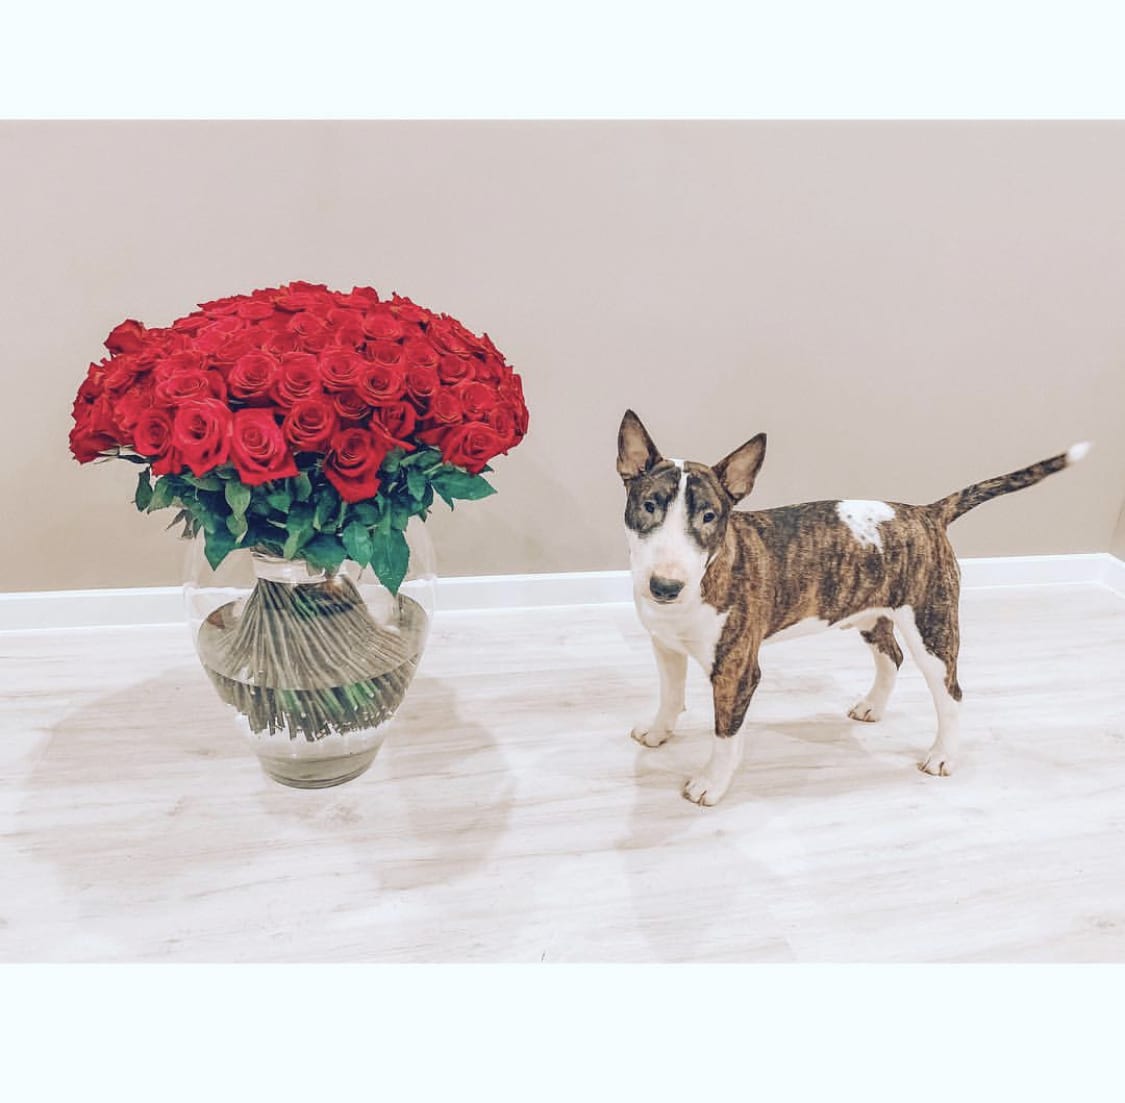 A Bull Terrier puppy standing on the table in front of a bunch of red roses on a vase